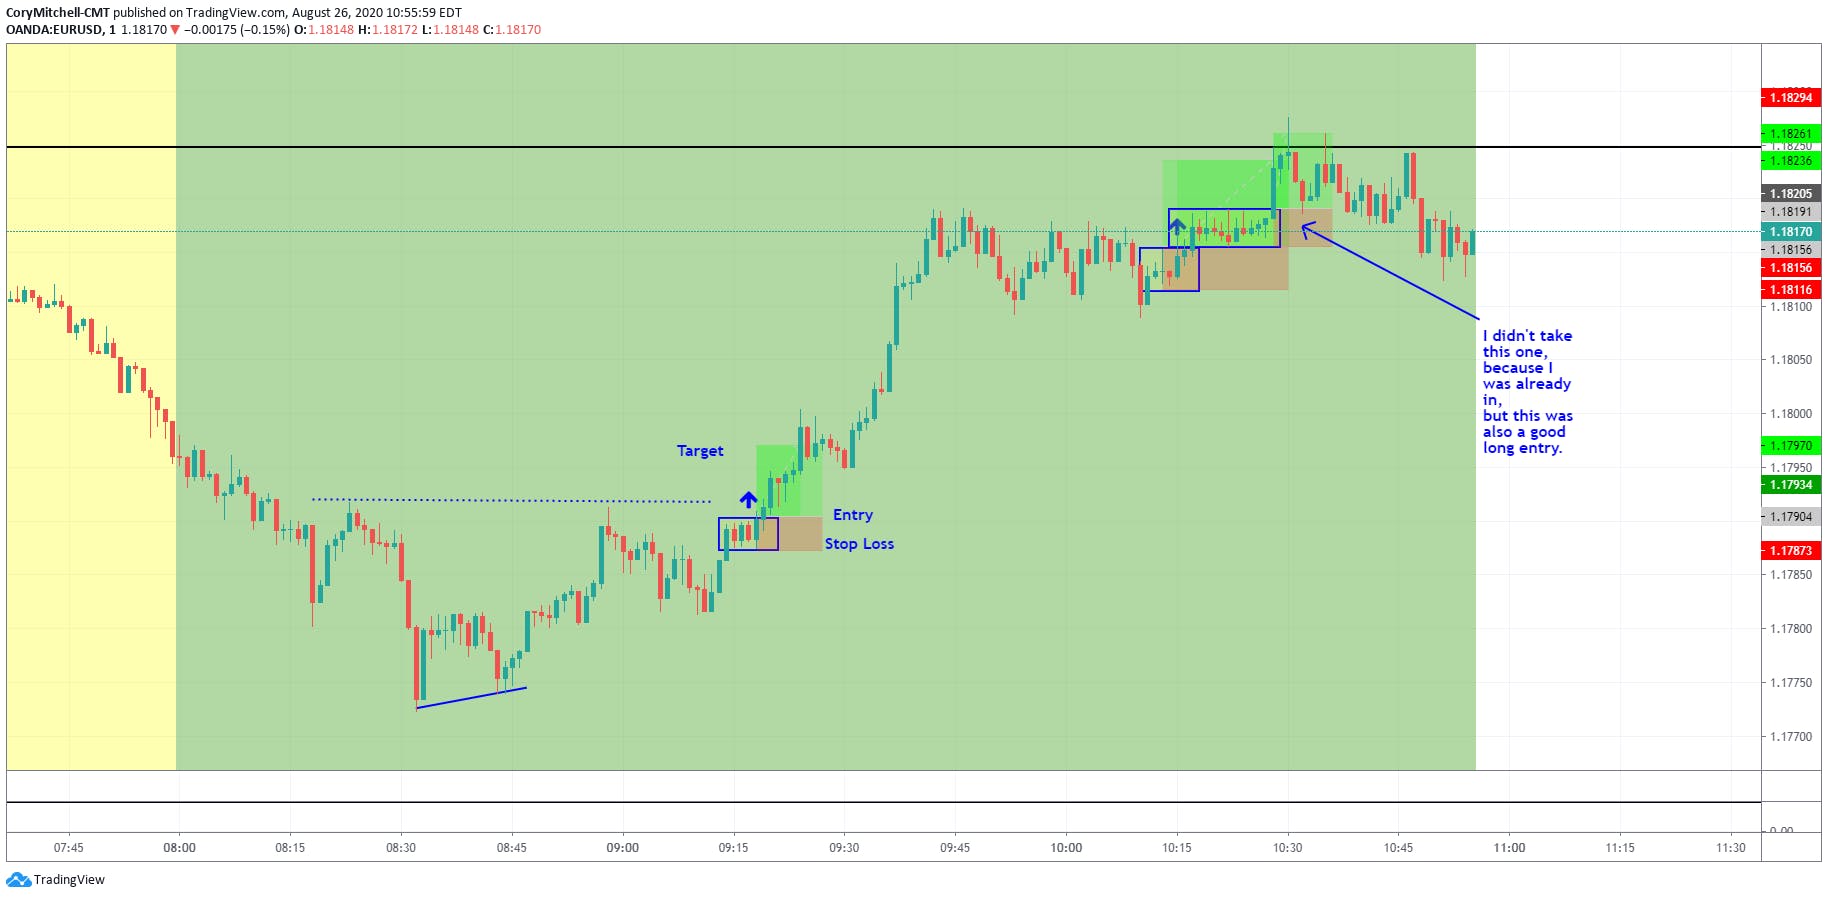 EURUSD day trading on the 1-minute chart August 26 2020